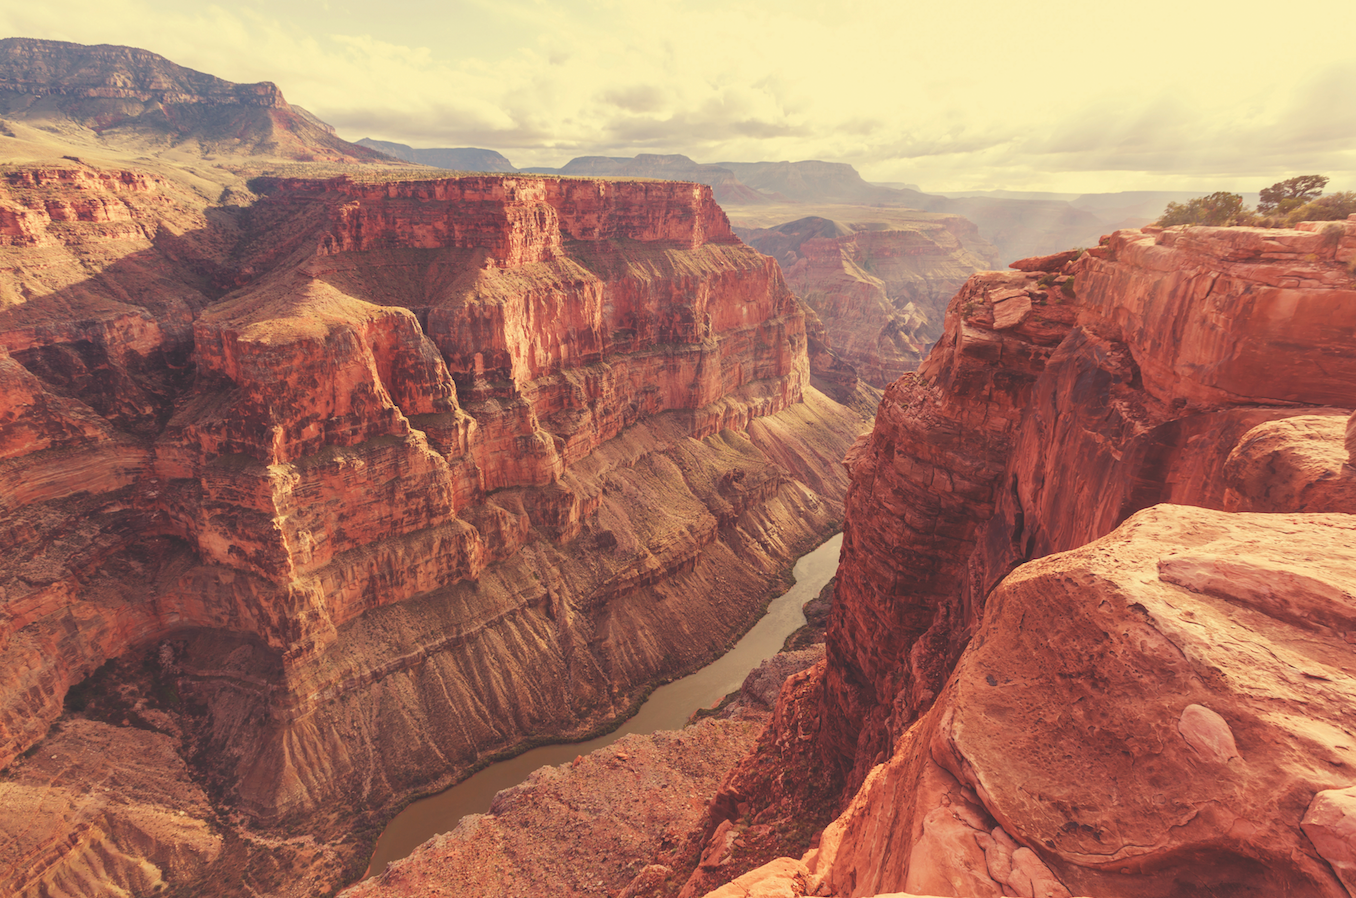 Skydive into the Grand Canyon